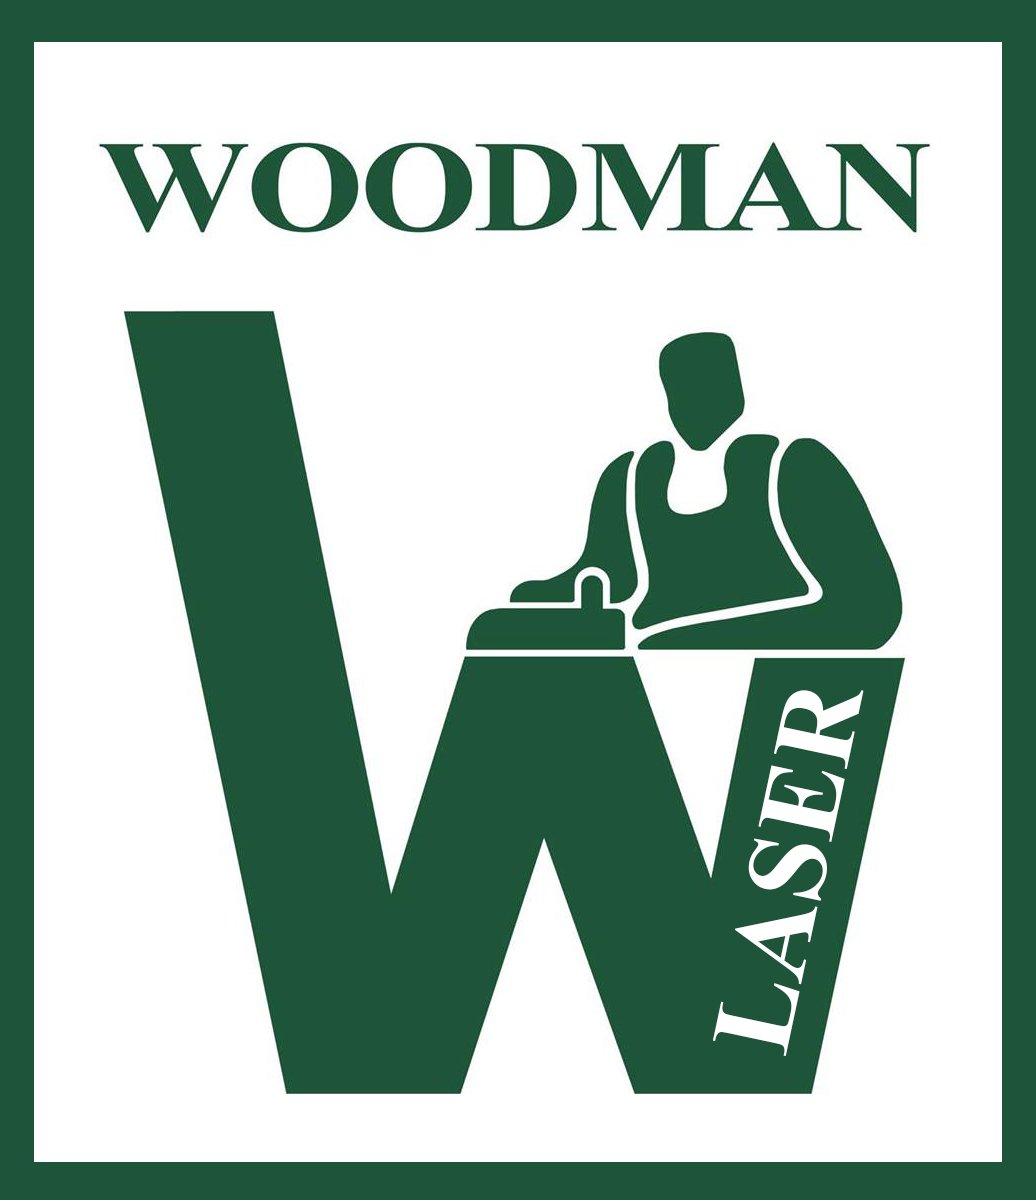 Woodman laser provides a wide range of possibilities. To customize products made with wood, glass, stone, plastic, fabric, coated metal and much more!